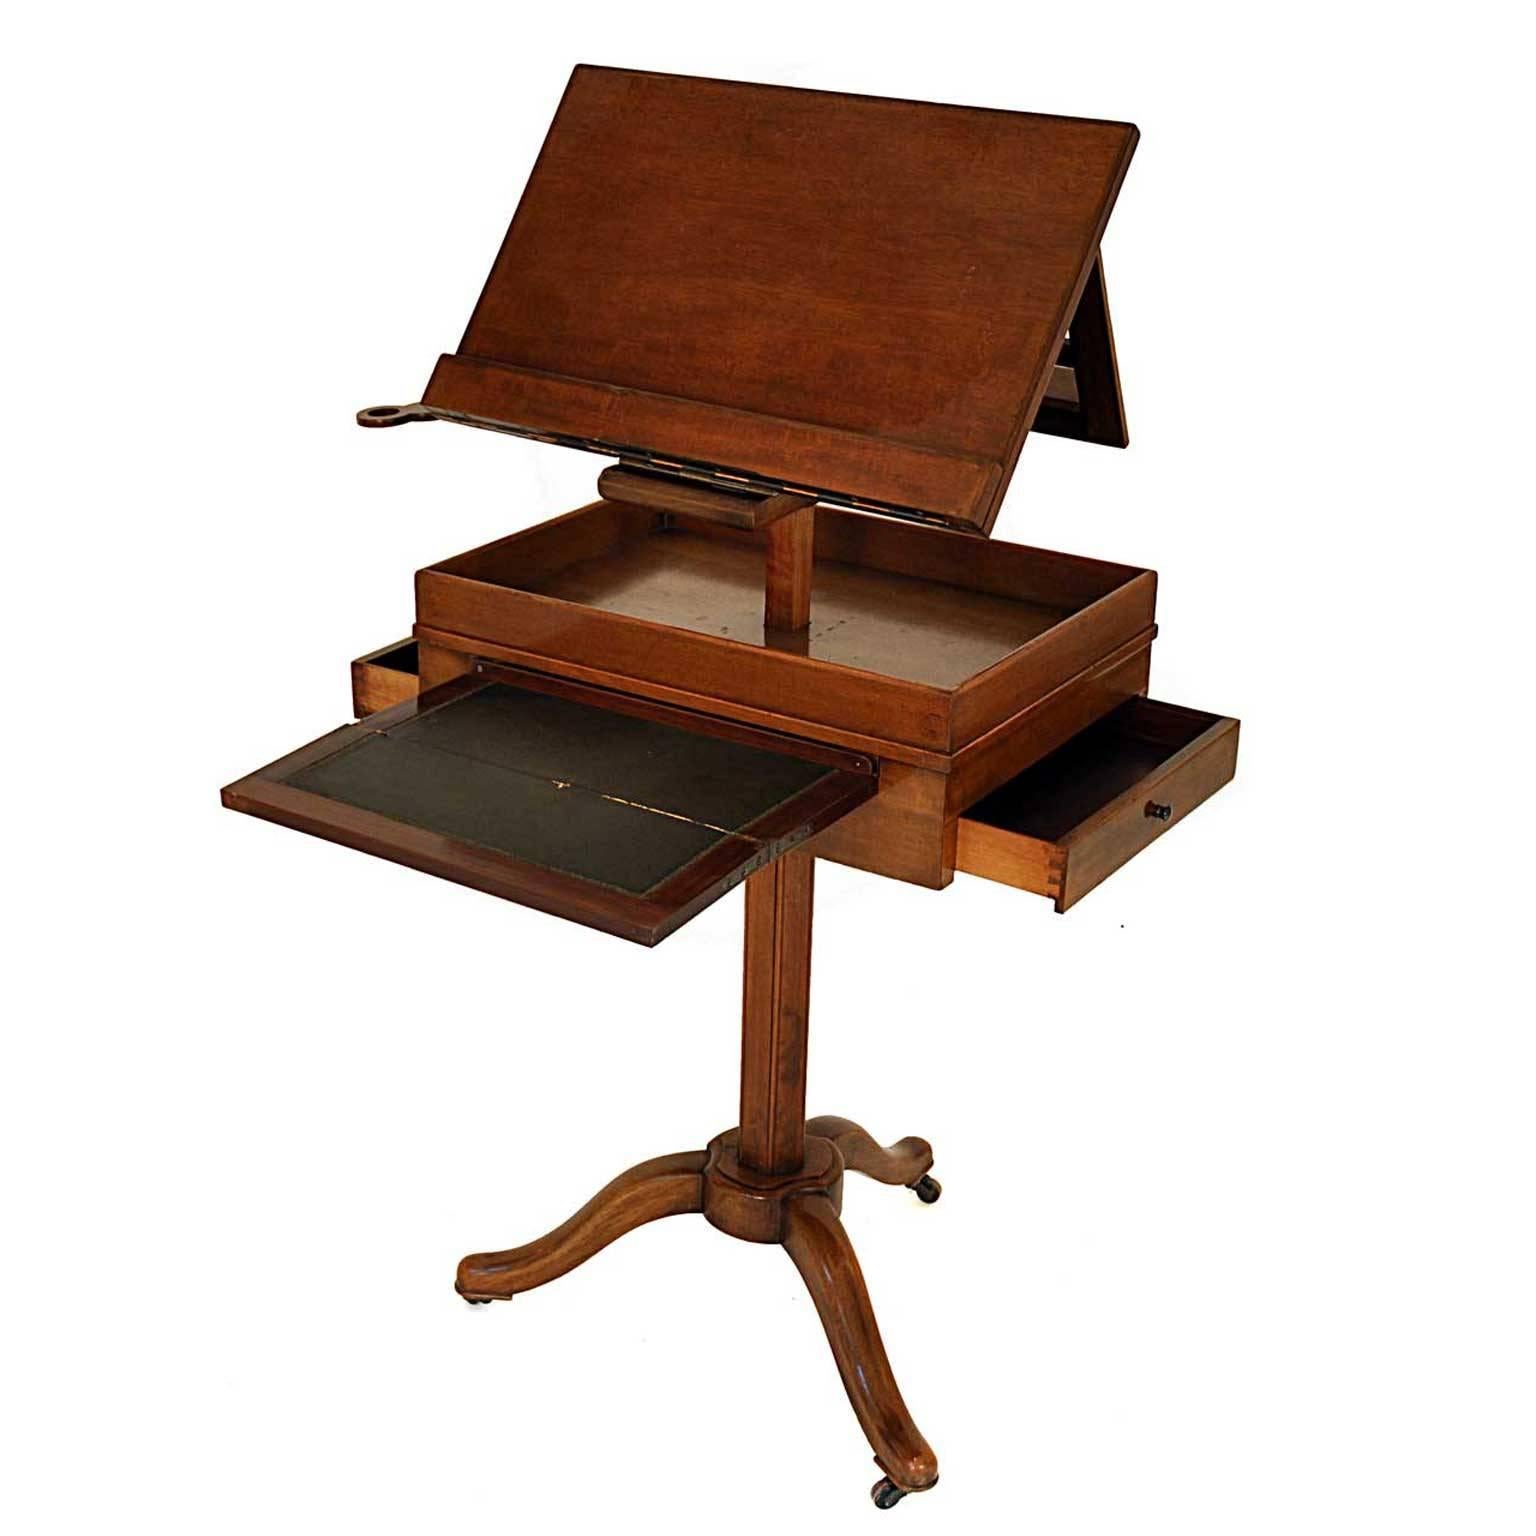 This piece was designed by Flatow&Priemer in 1823 in Berlin. The table is made of mahogany. It is possible to adjust the high. There are three drawers and one extensible panel. The item has wheels. The signature is placed on the bottom.